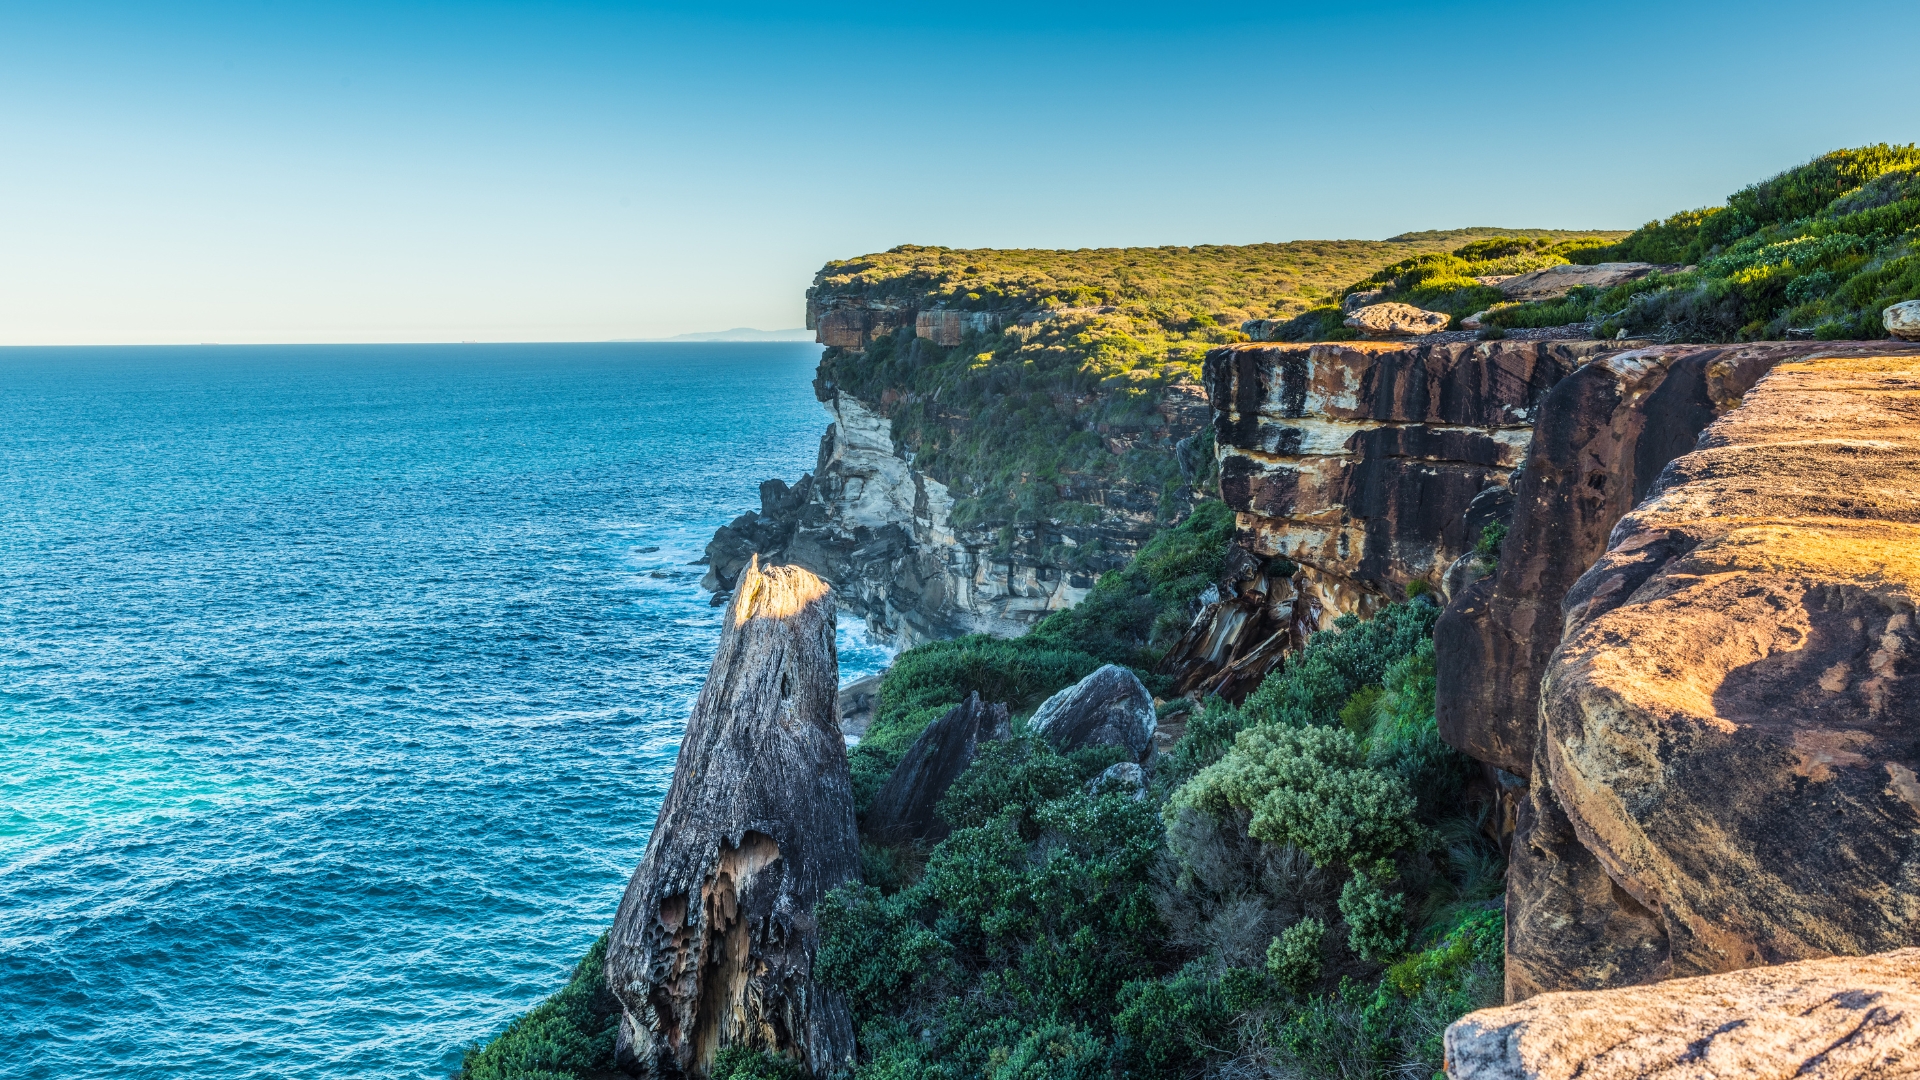 Hero image for the experience offer called: Private Royal National Park Tour